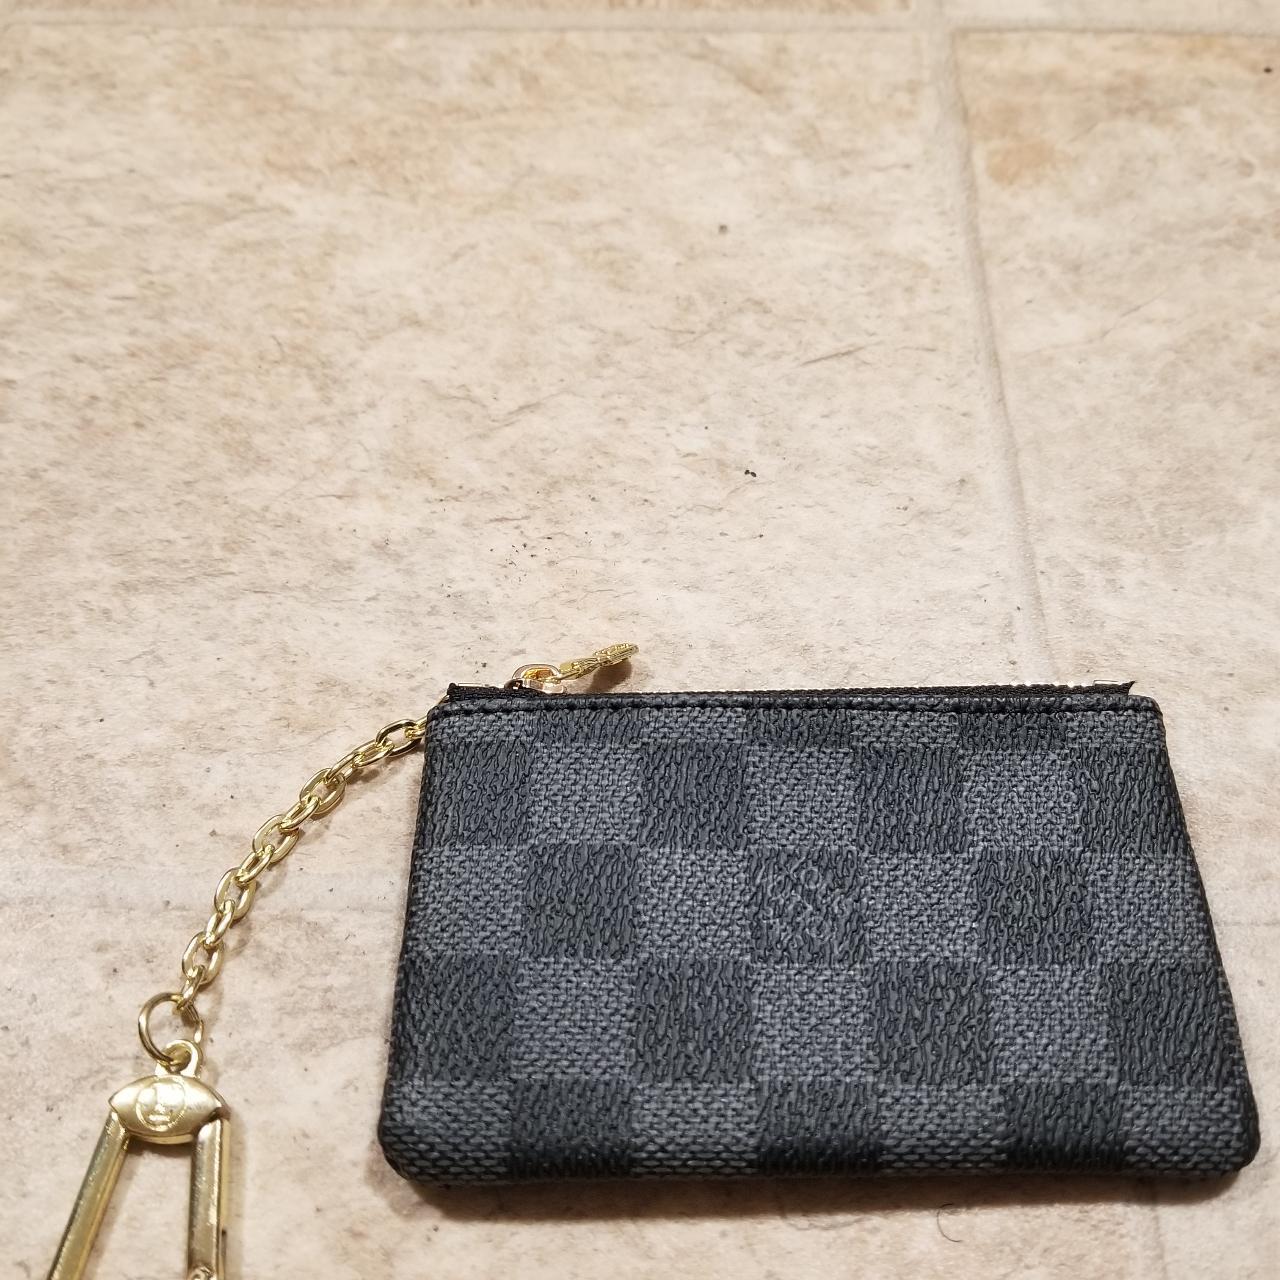 LV Small key chain/wallet “Recto Verso”. Don't use - Depop